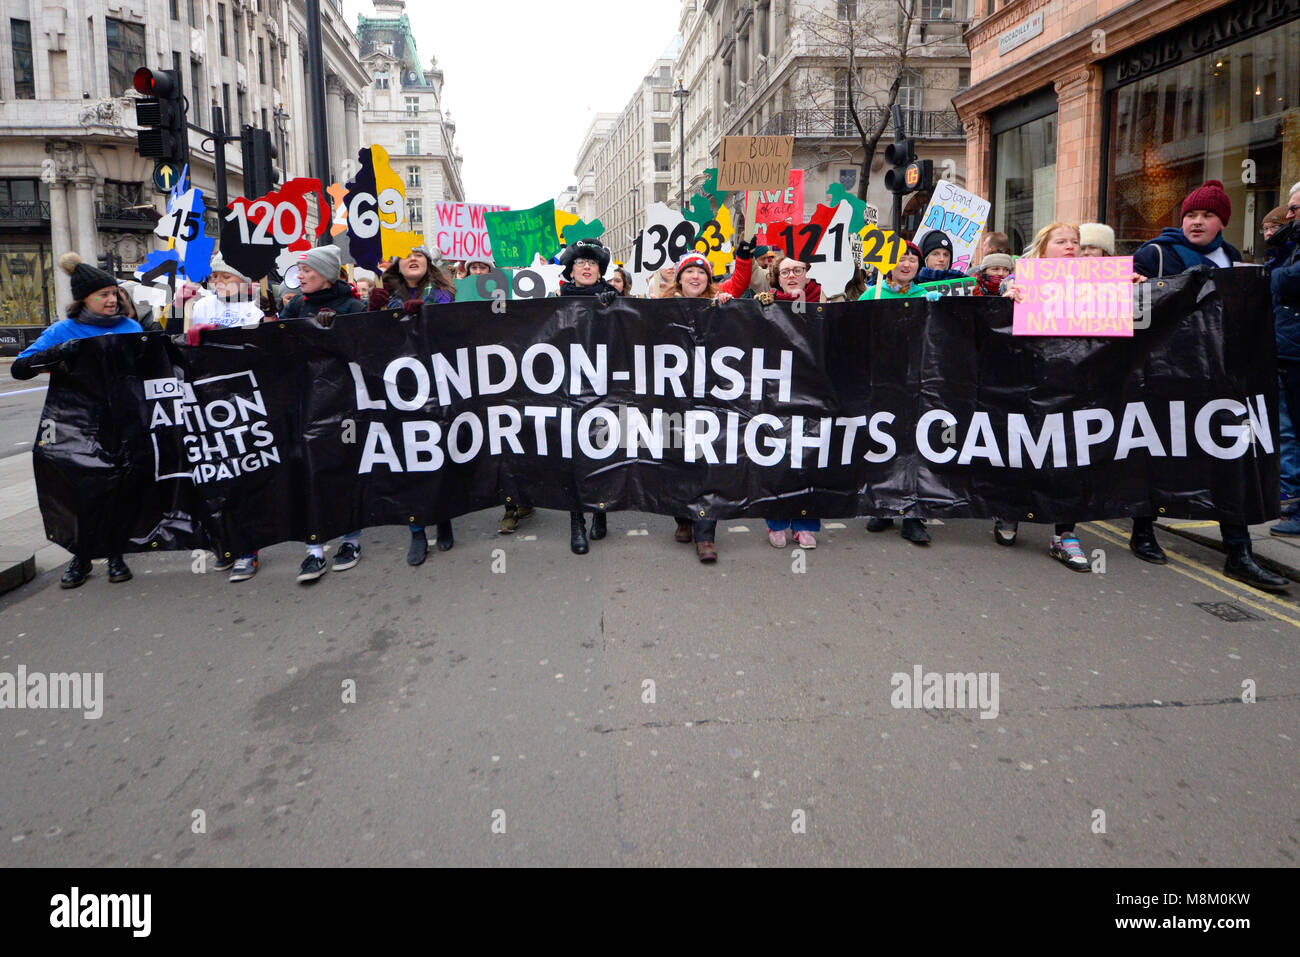 St Patrick's Day Parade, London, 2018. London Irish Abortion Rights Campaign banner. Protesters. Marching. Protest Stock Photo